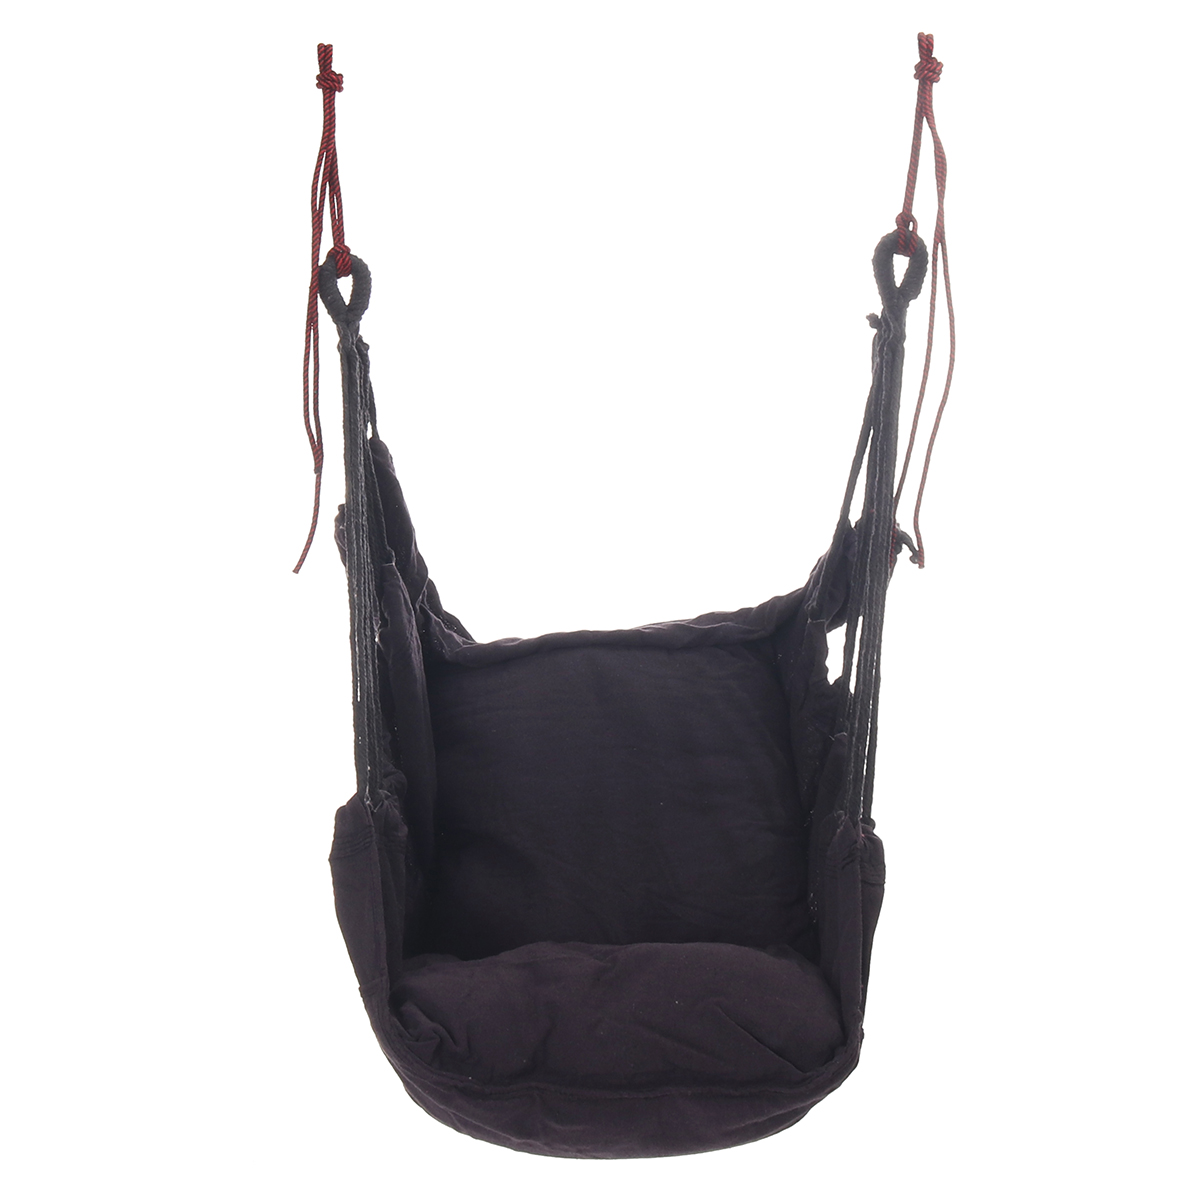 130x100cm-Hammock-Chair-Hanging-Seat-Swing-Chair-Camping-Travel-Garden-Max-Load-250kg-1731953-5